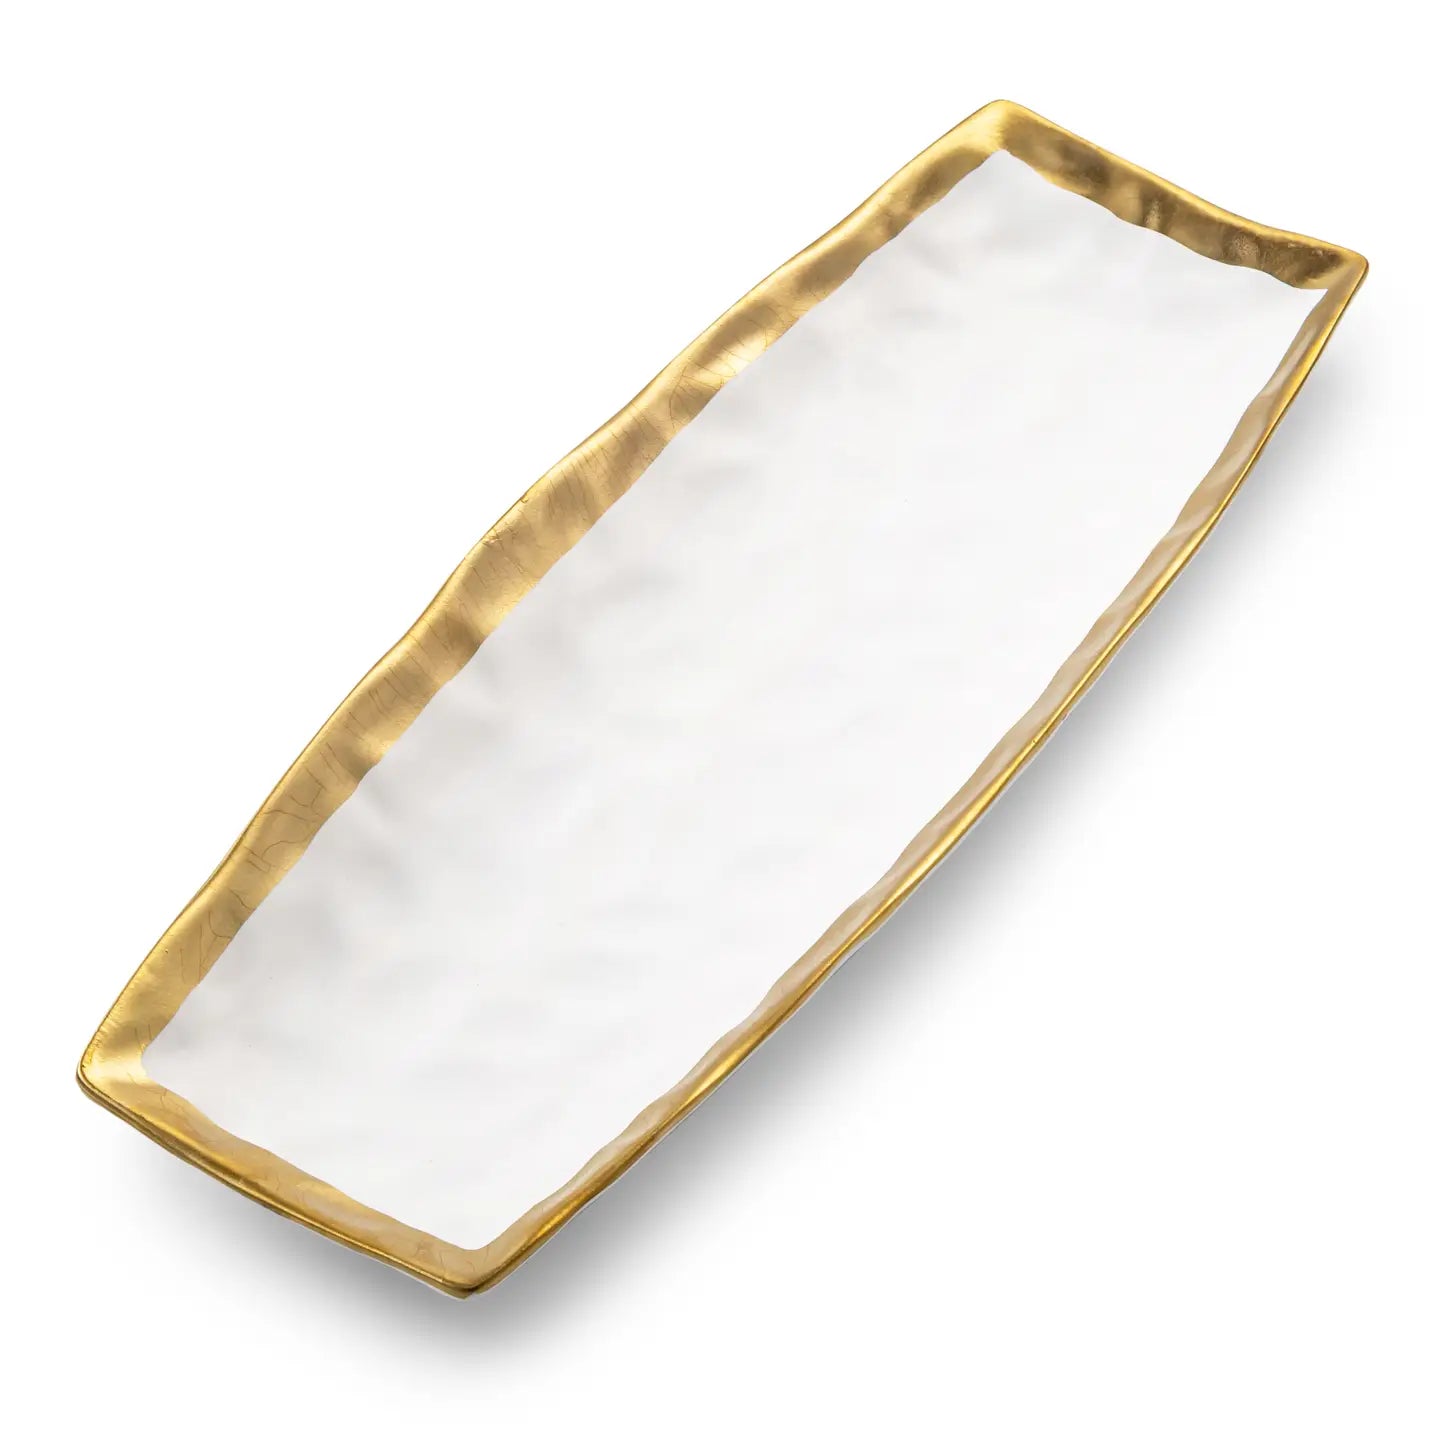 White Porcelain Oblong Tray with Gold Rim 15.5”L x 6”W